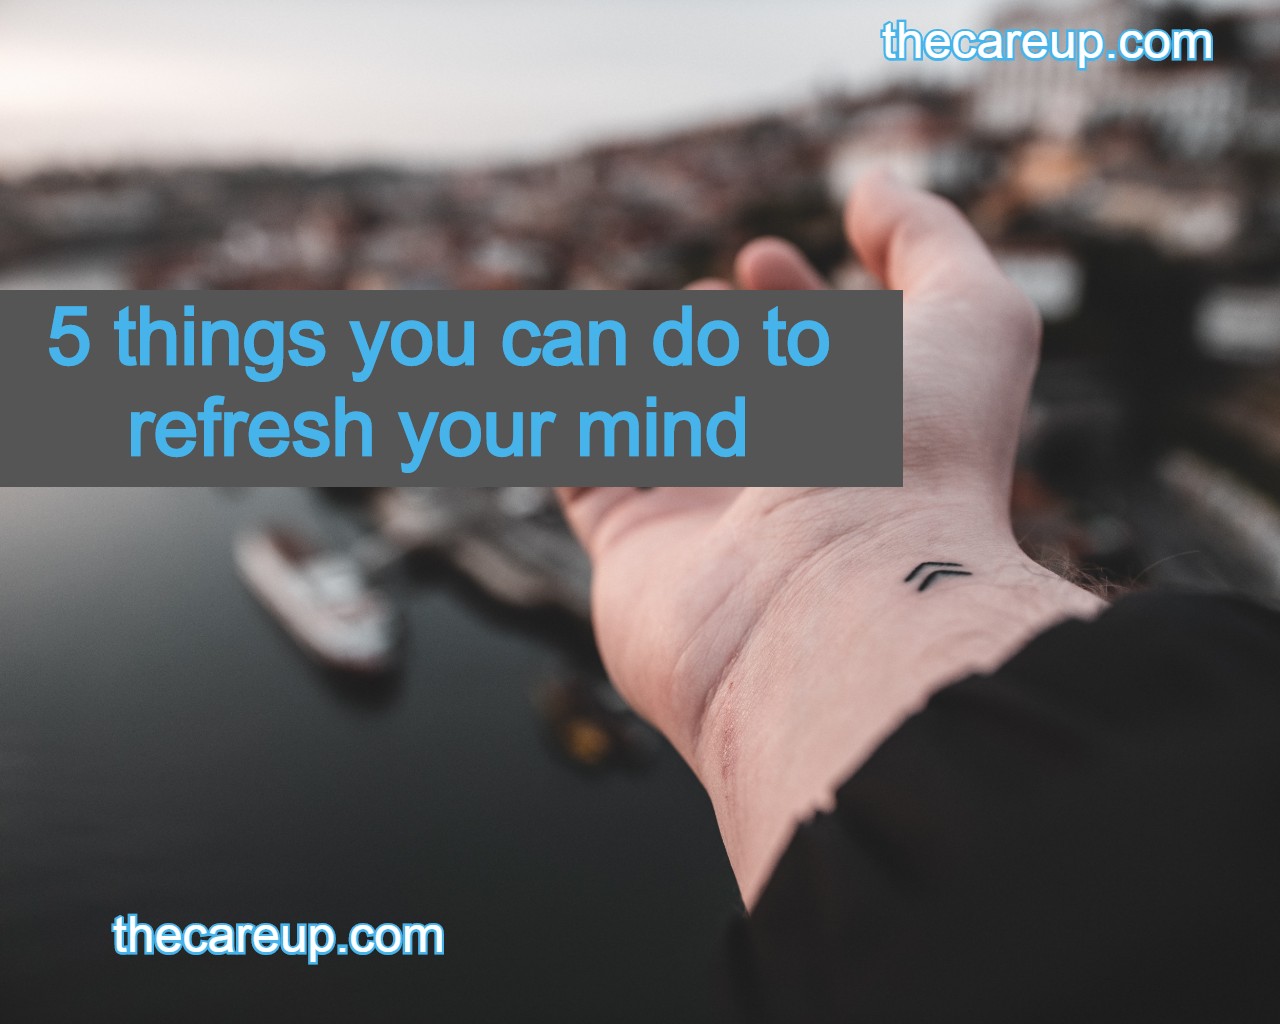 5 things you can do to refresh your mind